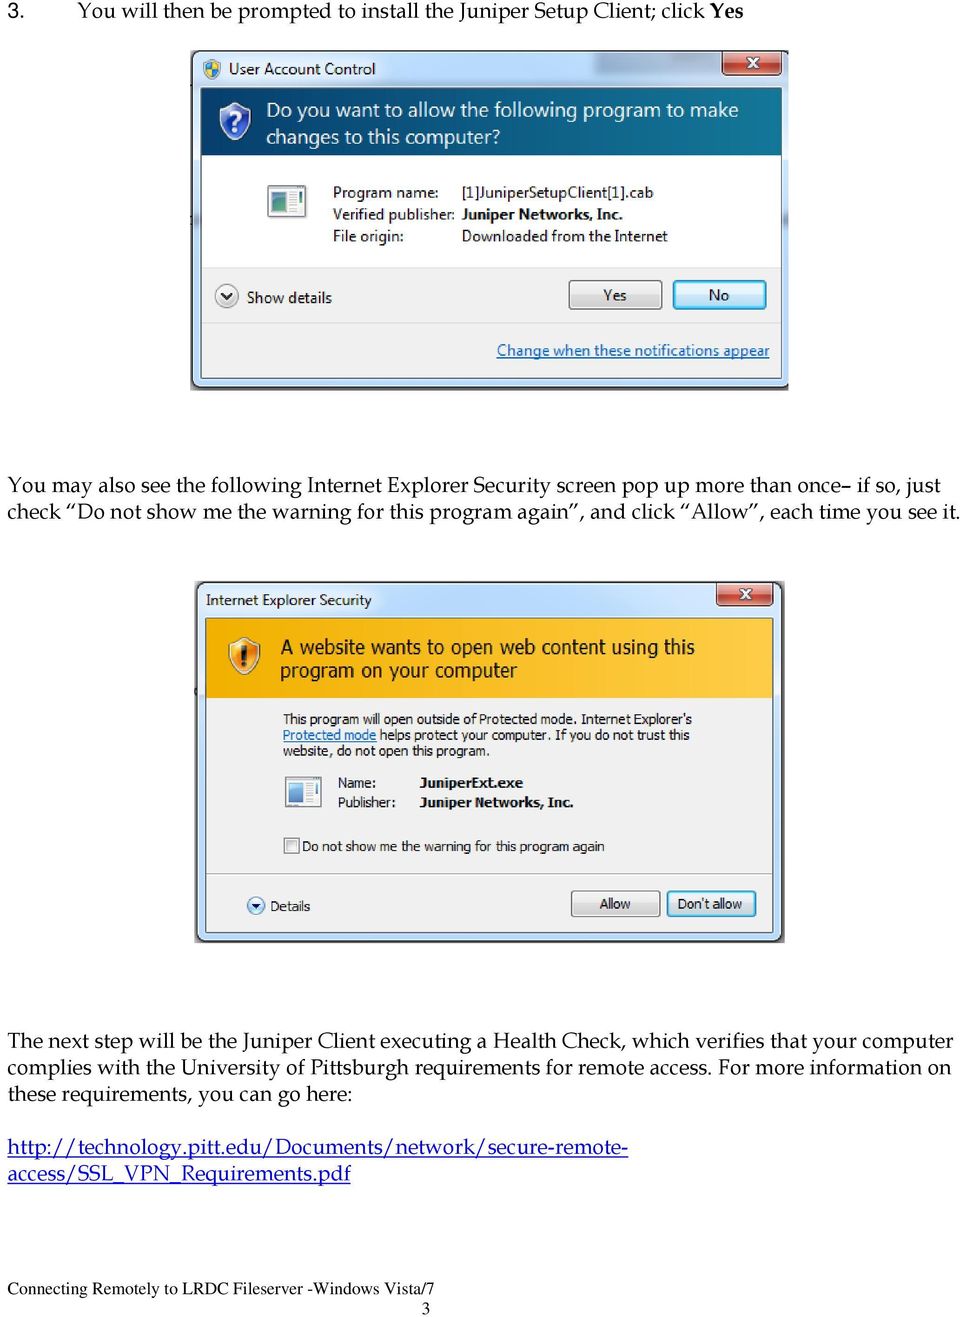 The next step will be the Juniper Client executing a Health Check, which verifies that your computer complies with the University of Pittsburgh